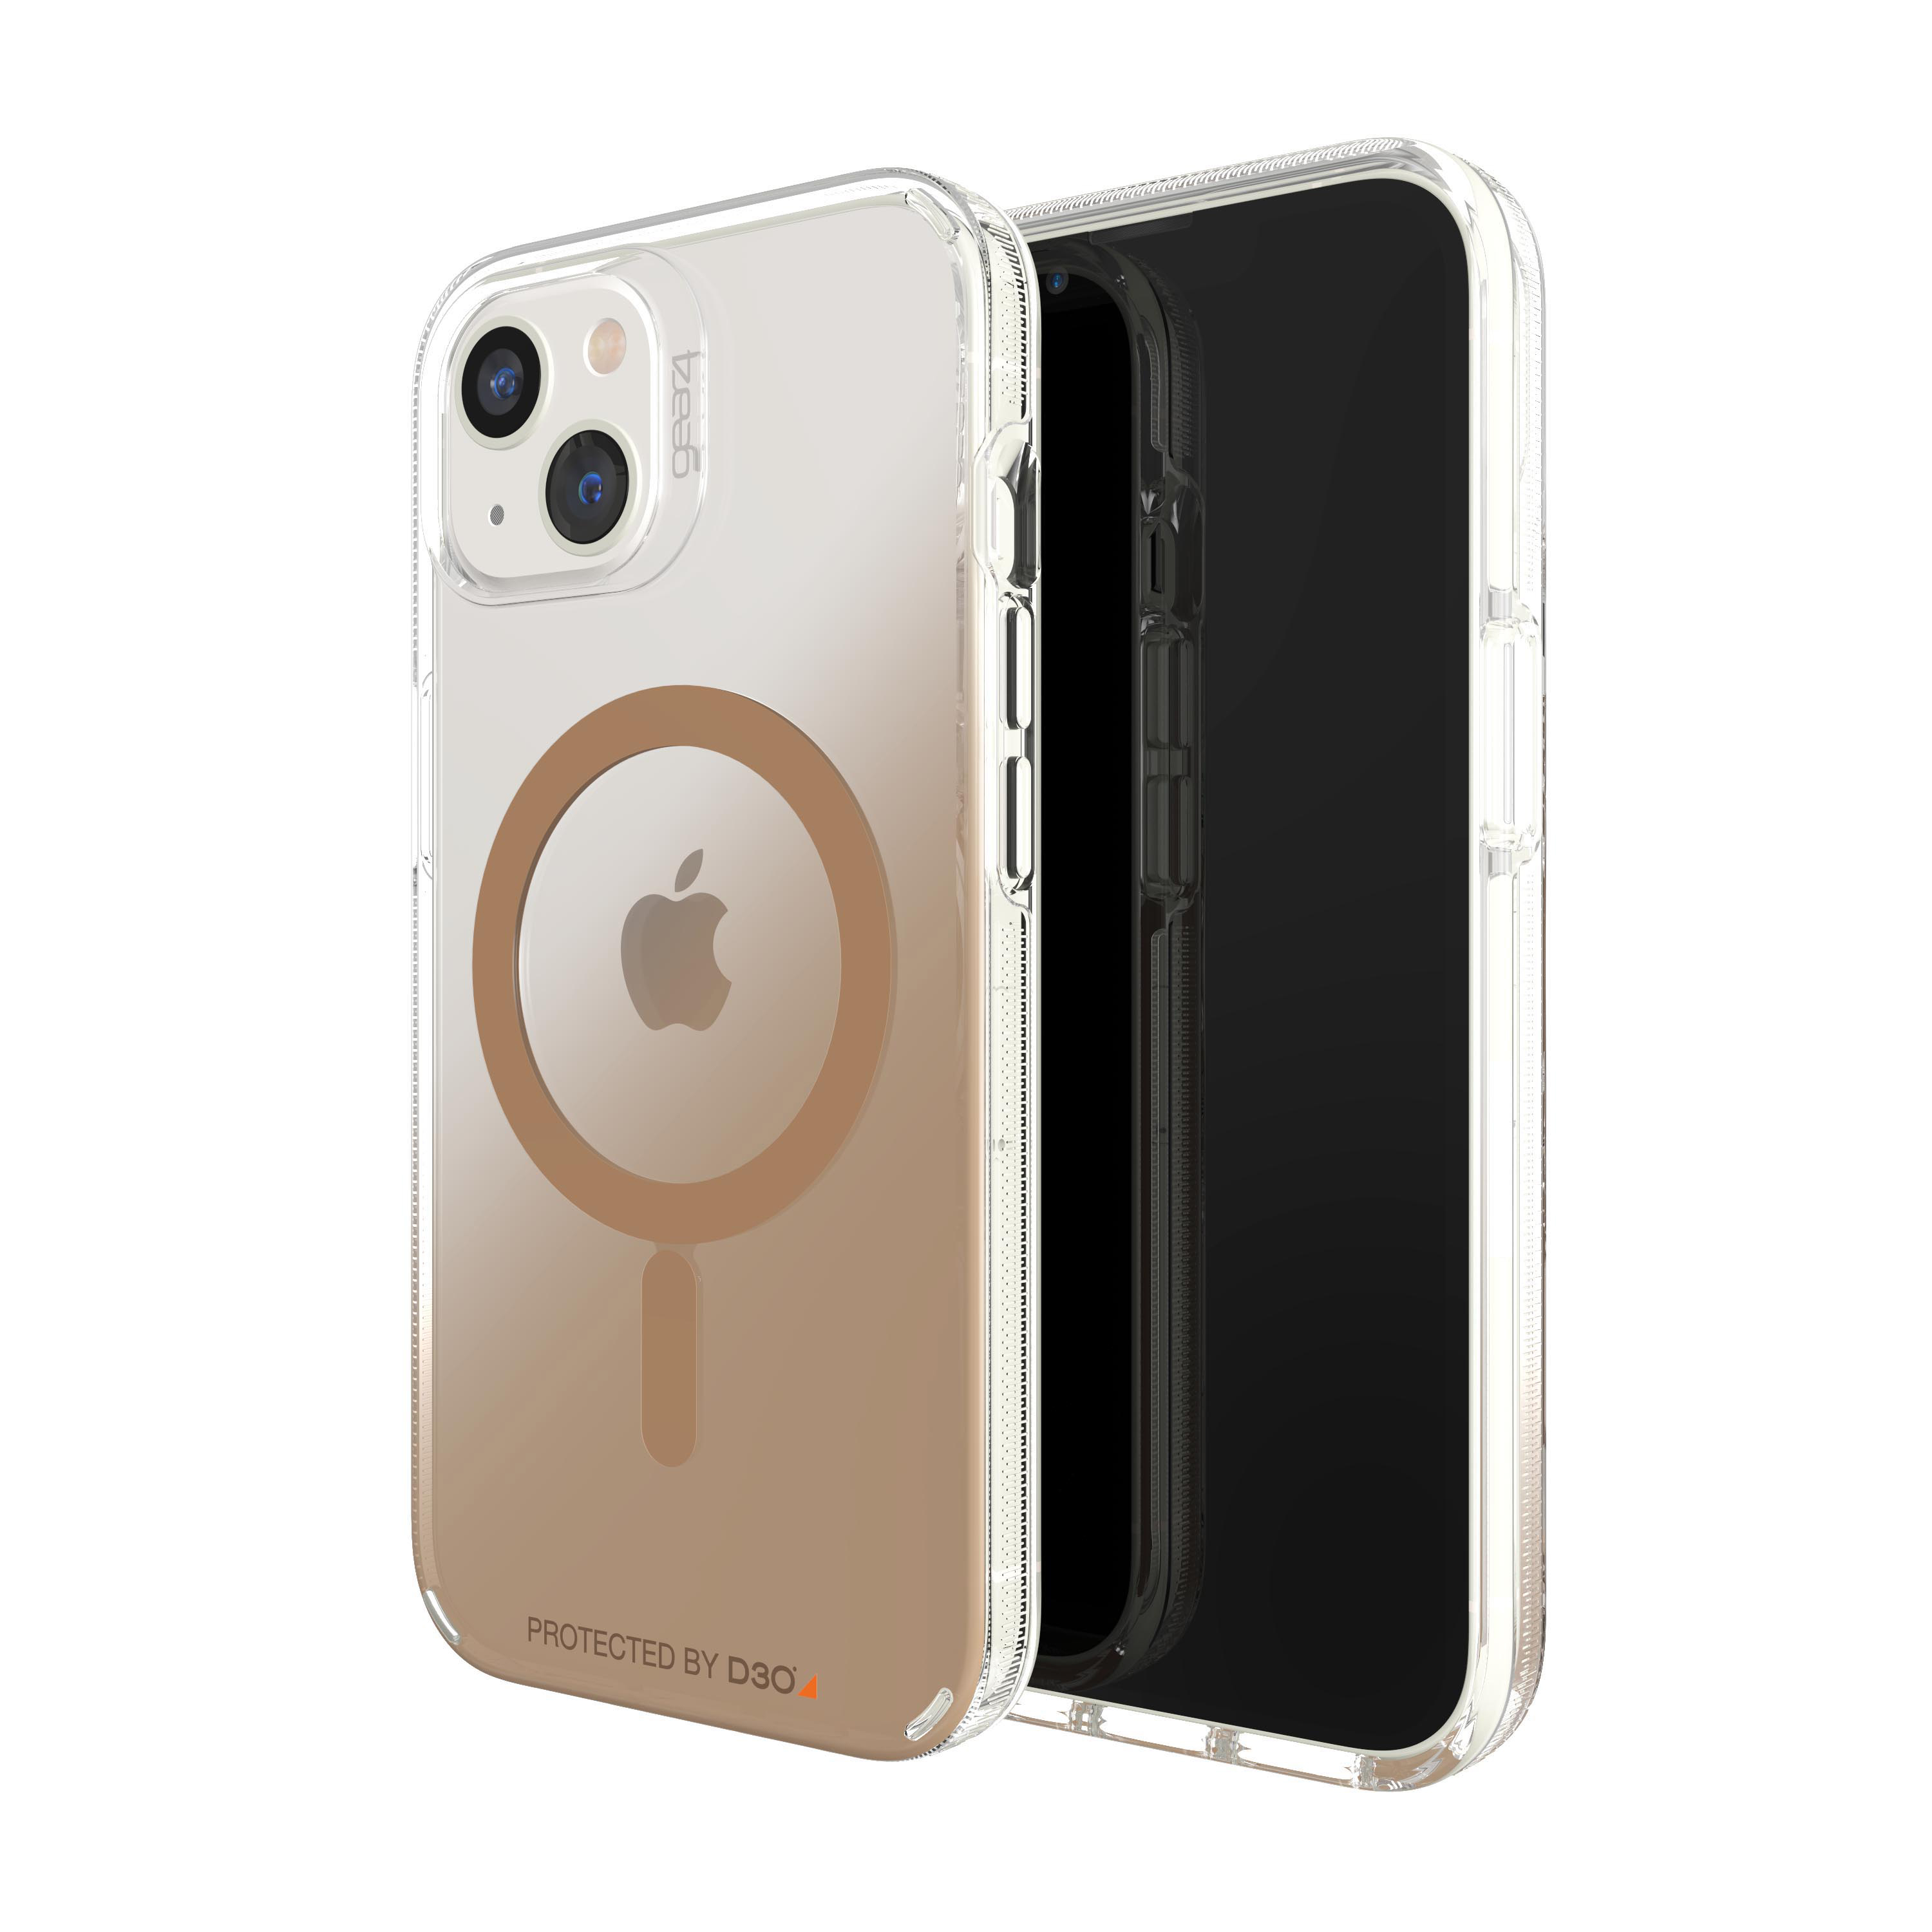 GEAR4 D3O Snap, Cases Milan 13, Backcover, Gold Apple, iPhone